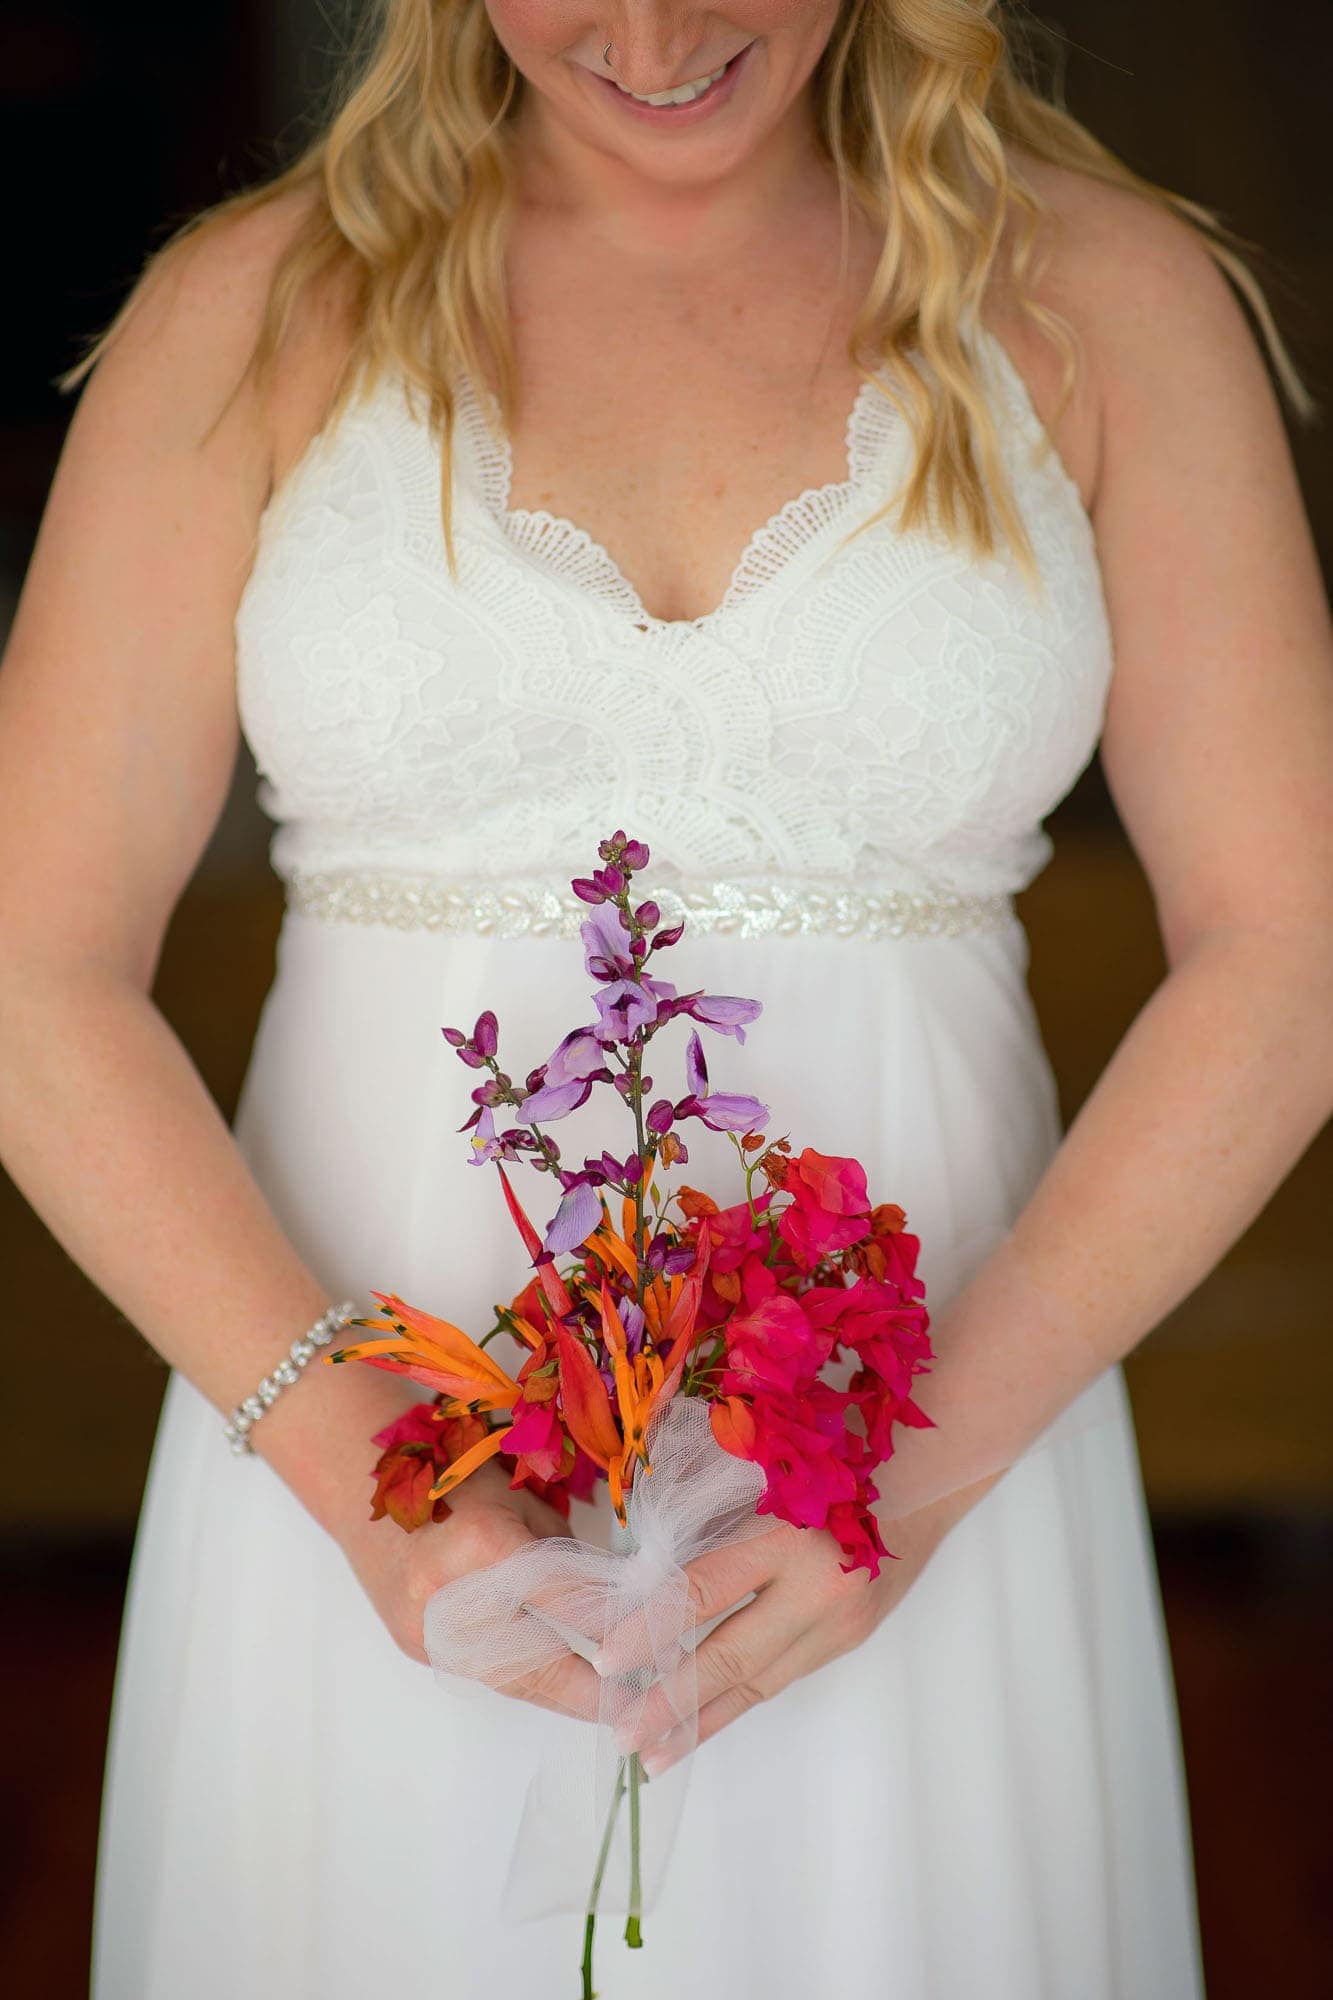 The bride with her flowers